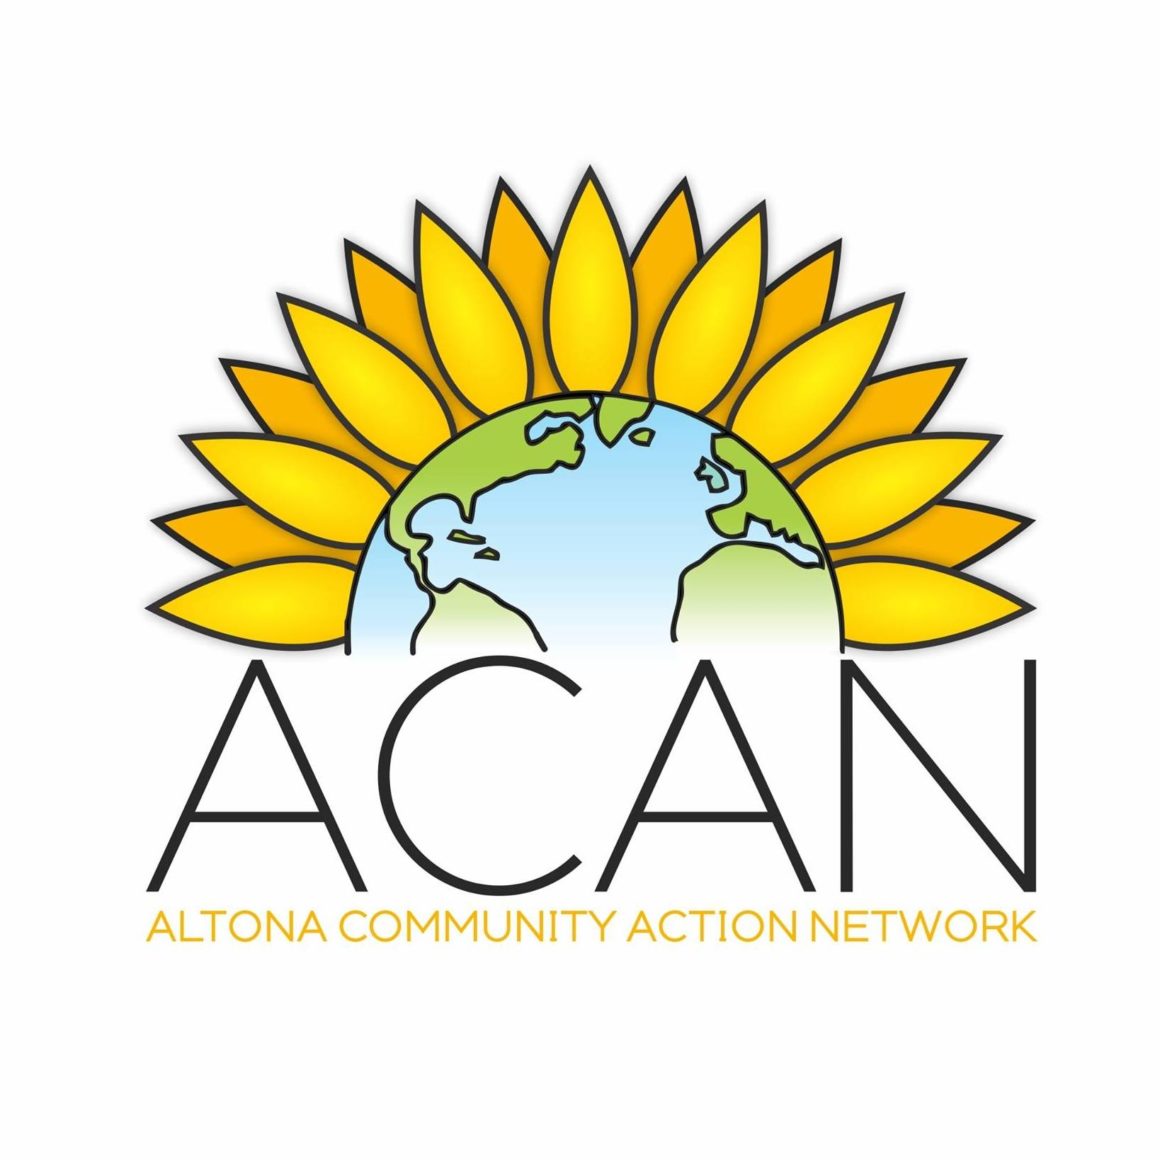 ACAN (Altona Community Action Network) **Updated Information**